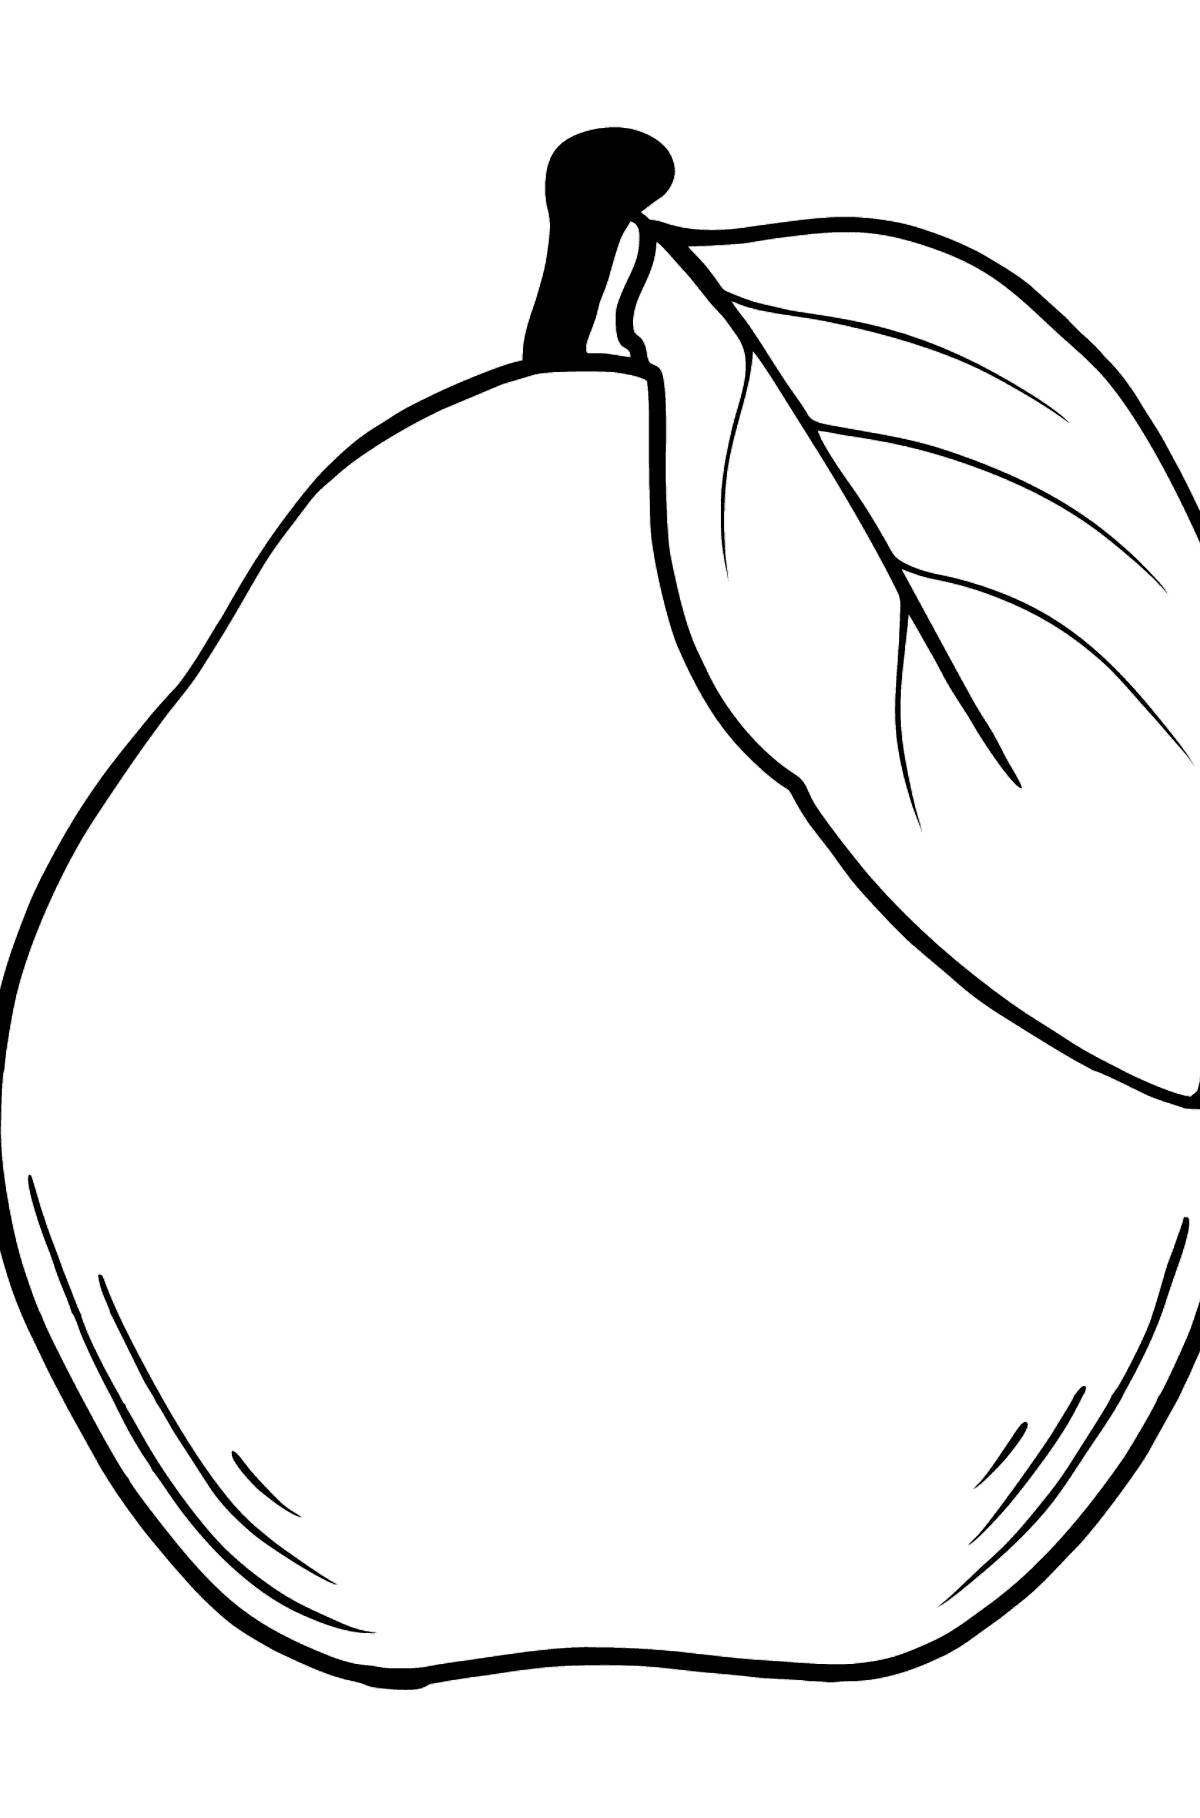 Fascinating pear coloring book for kids